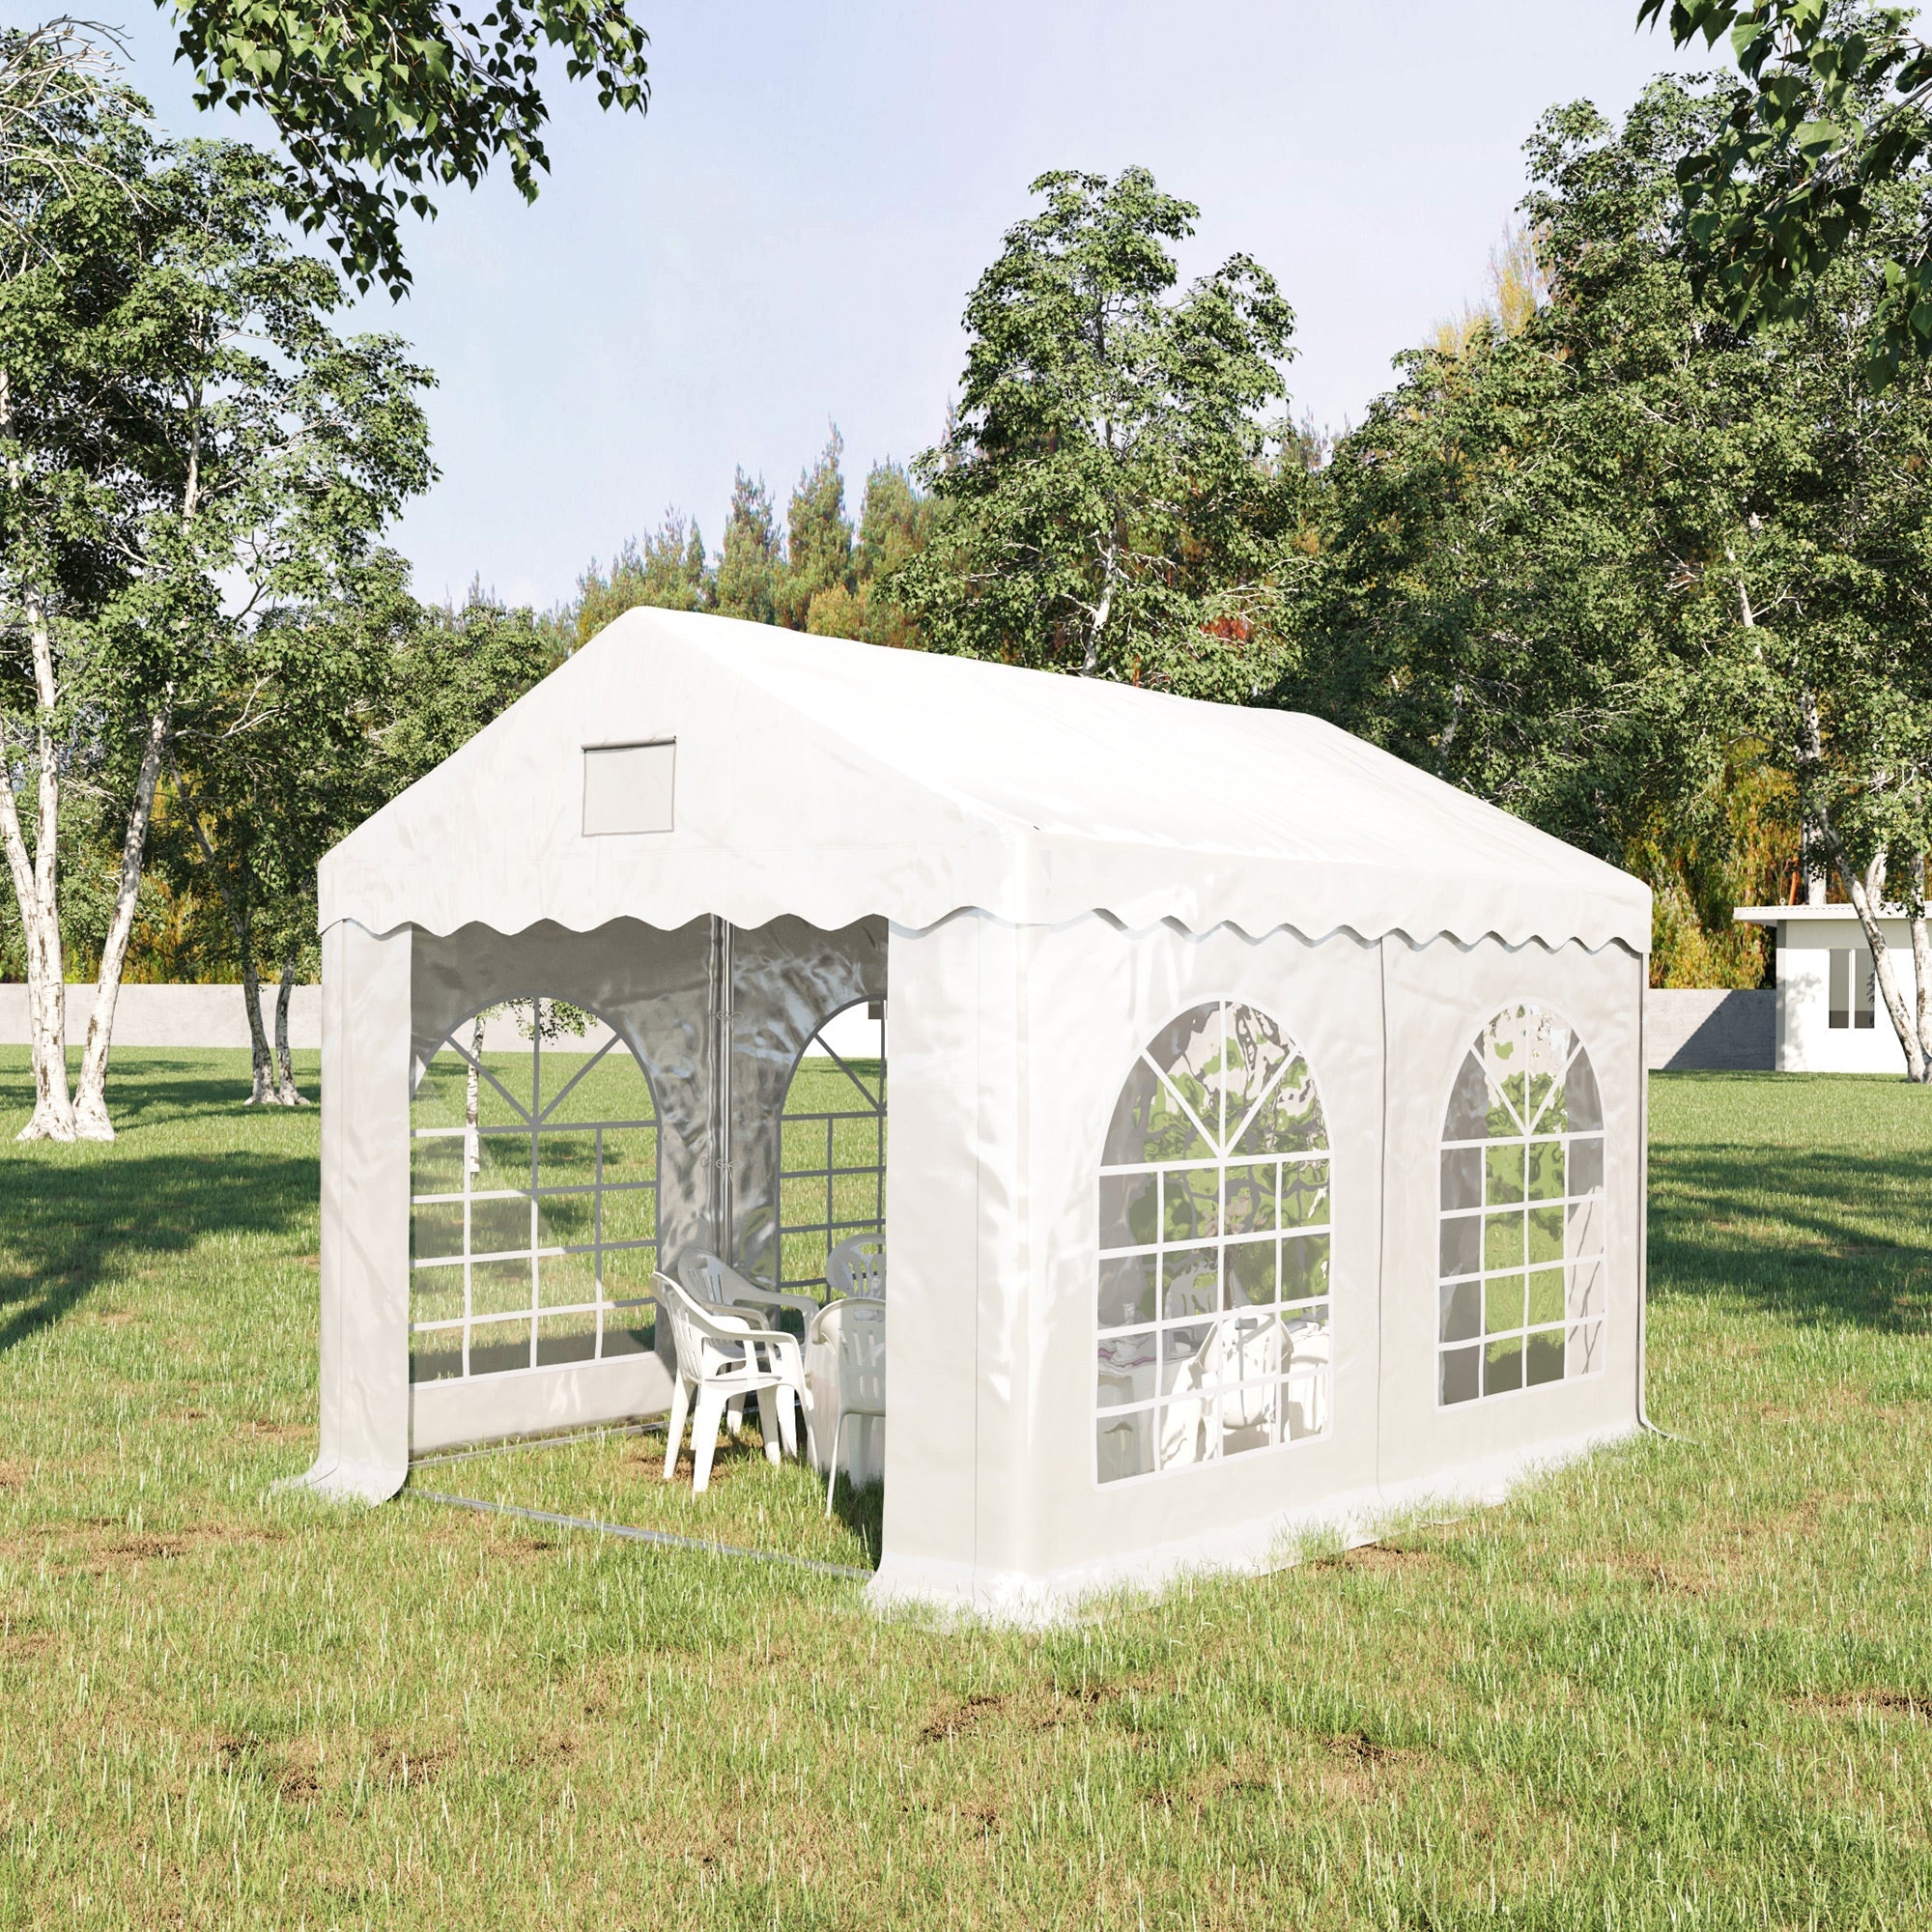 4 x 3 m Gazebo Canopy Party Tent with 4 Removable Side Walls and Windows for Outdoor Event, White-1